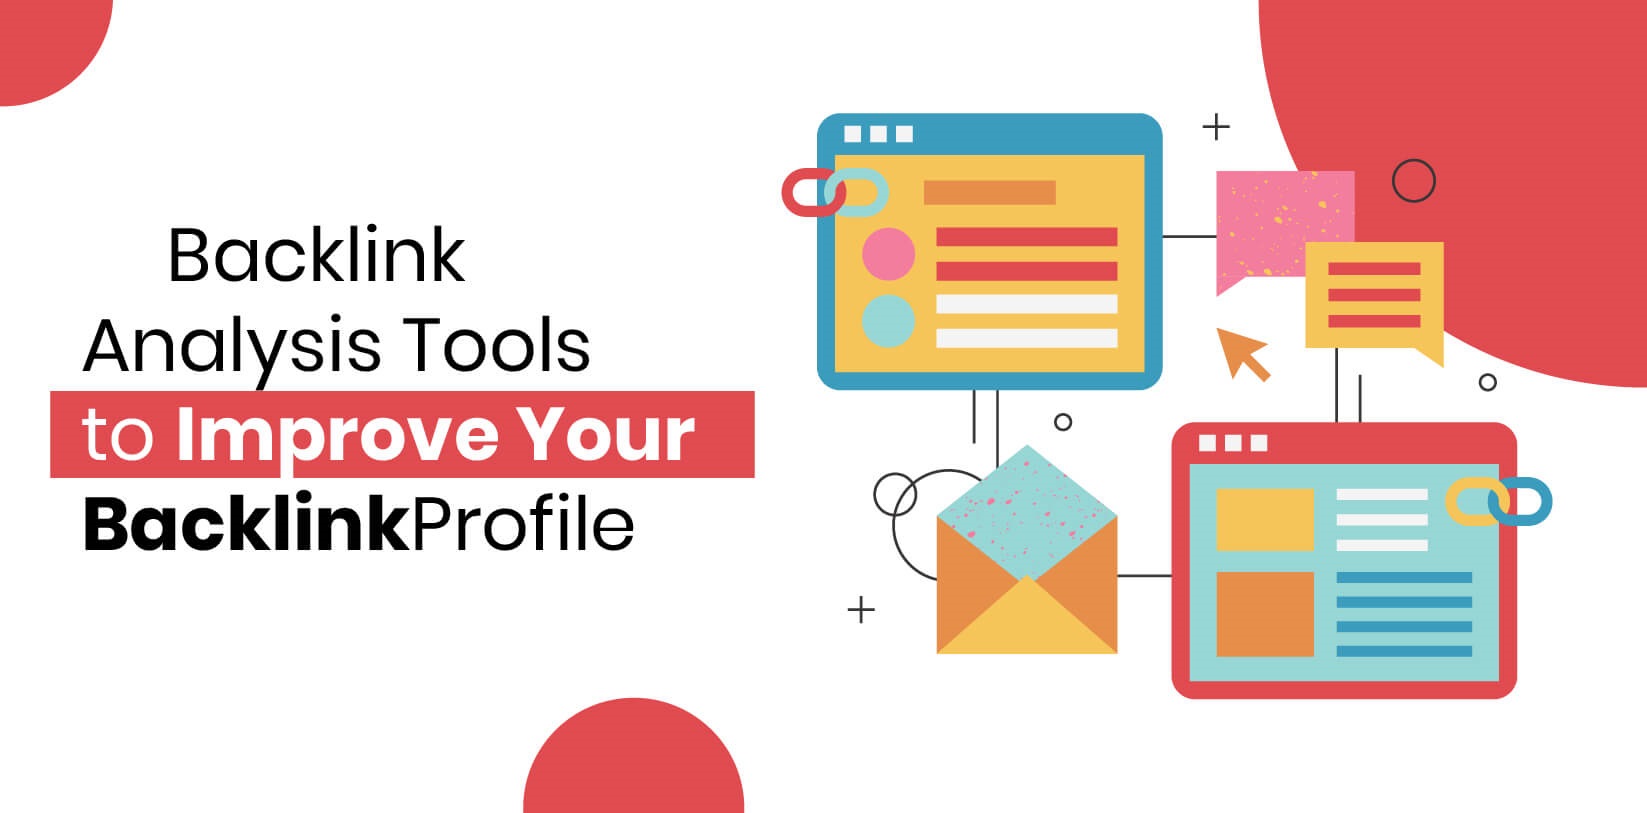 9 Backlink Analysis Tools That’ll Help You Understand Your Link Profile